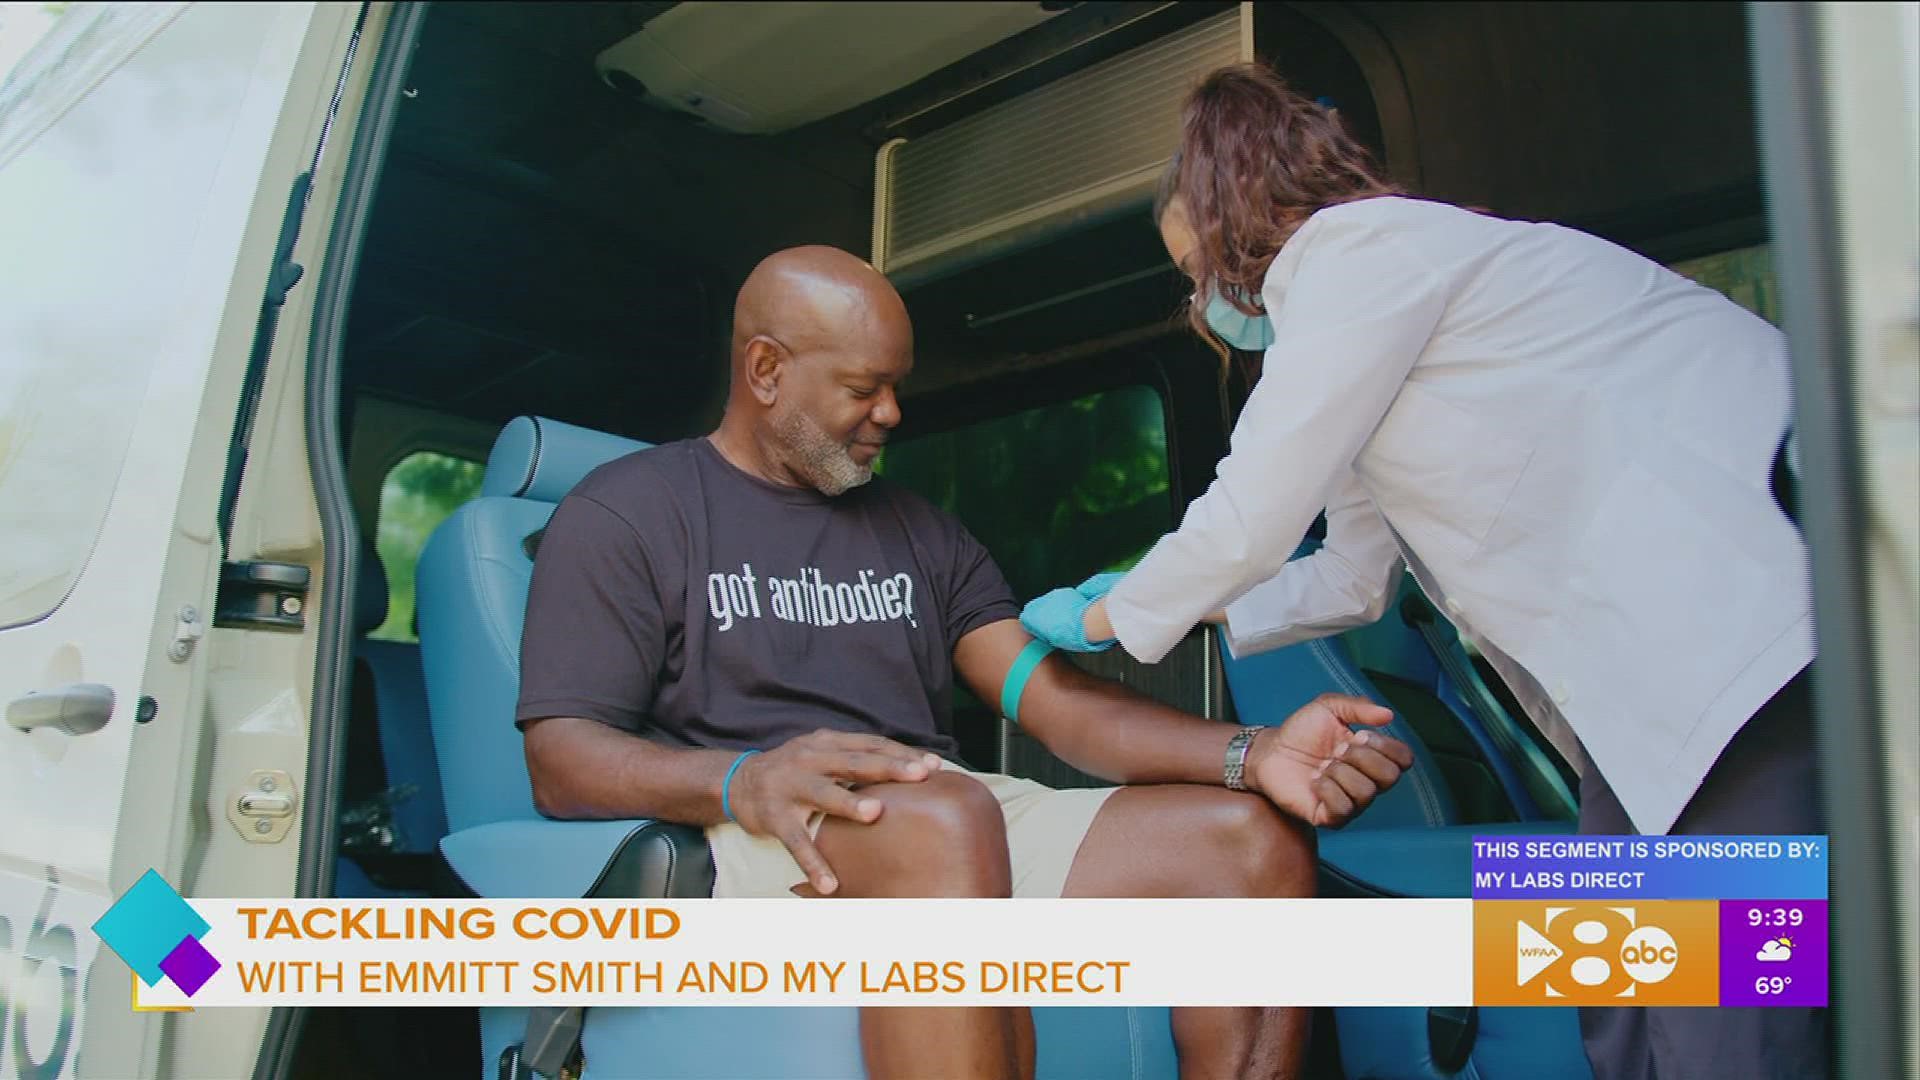 My Labs Direct and Dallas Legend Emmitt Smith are teaming up together and tackling COVID in a big way in hopes to keep us safe this holiday season.